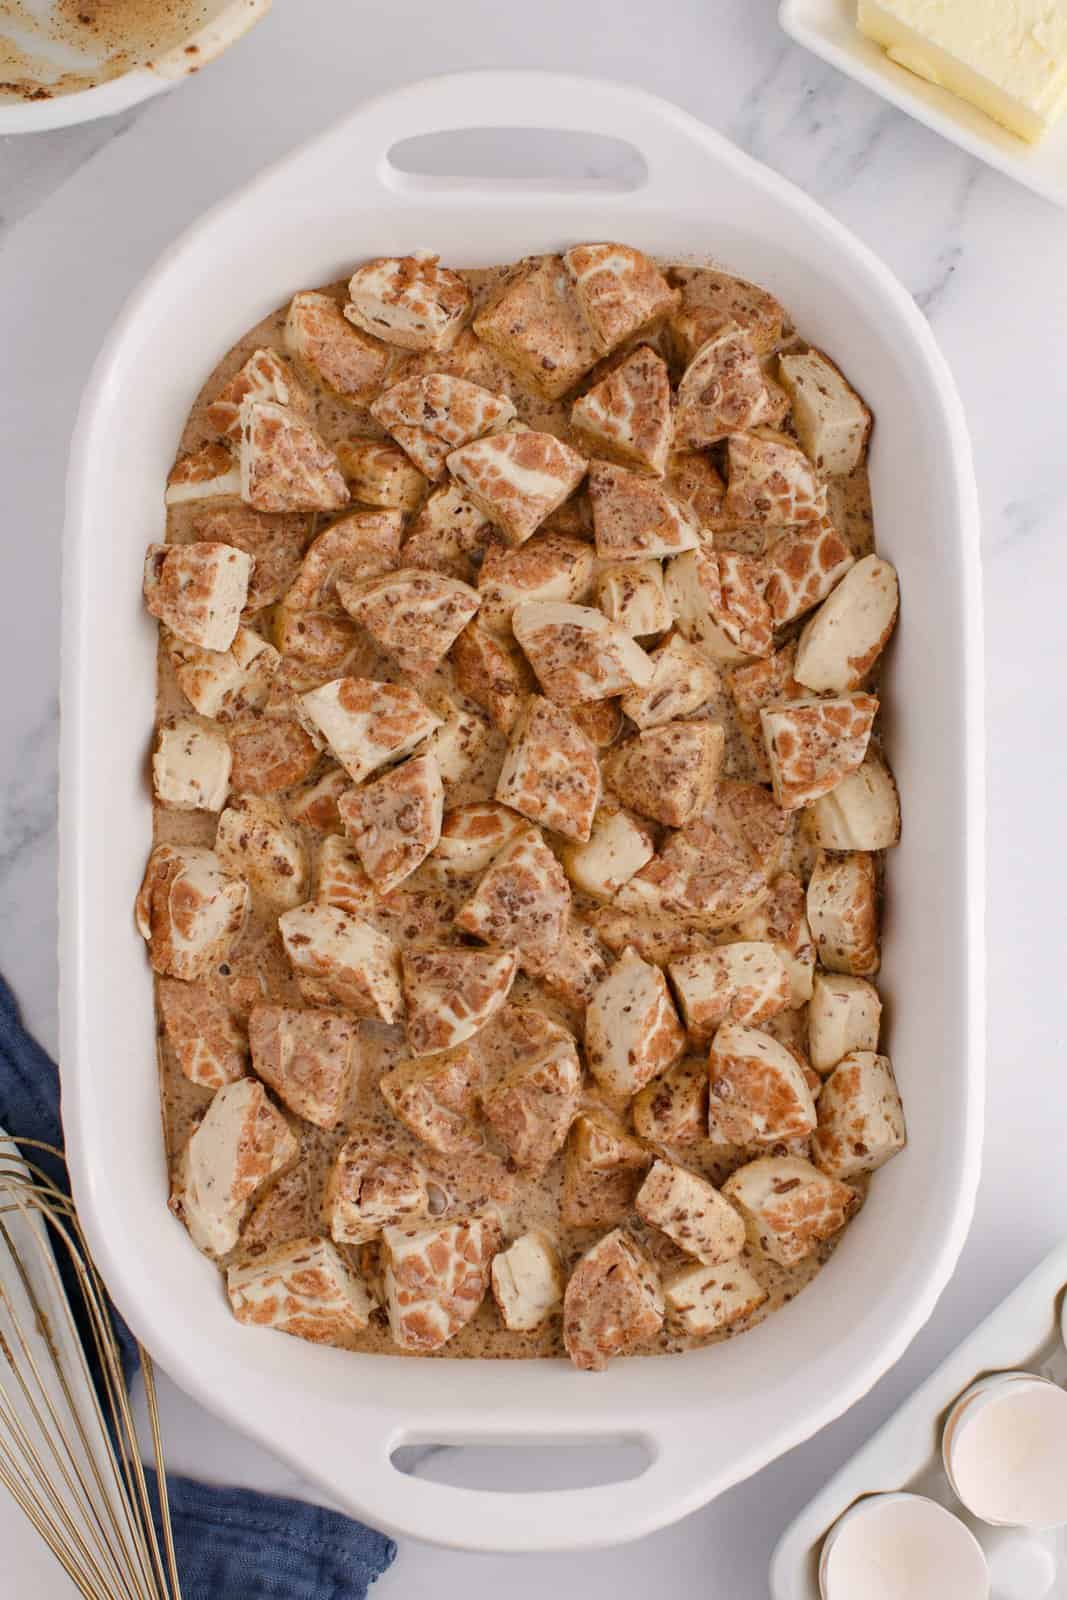 An uncooked Cinnamon Roll Casserole in a baking dish.